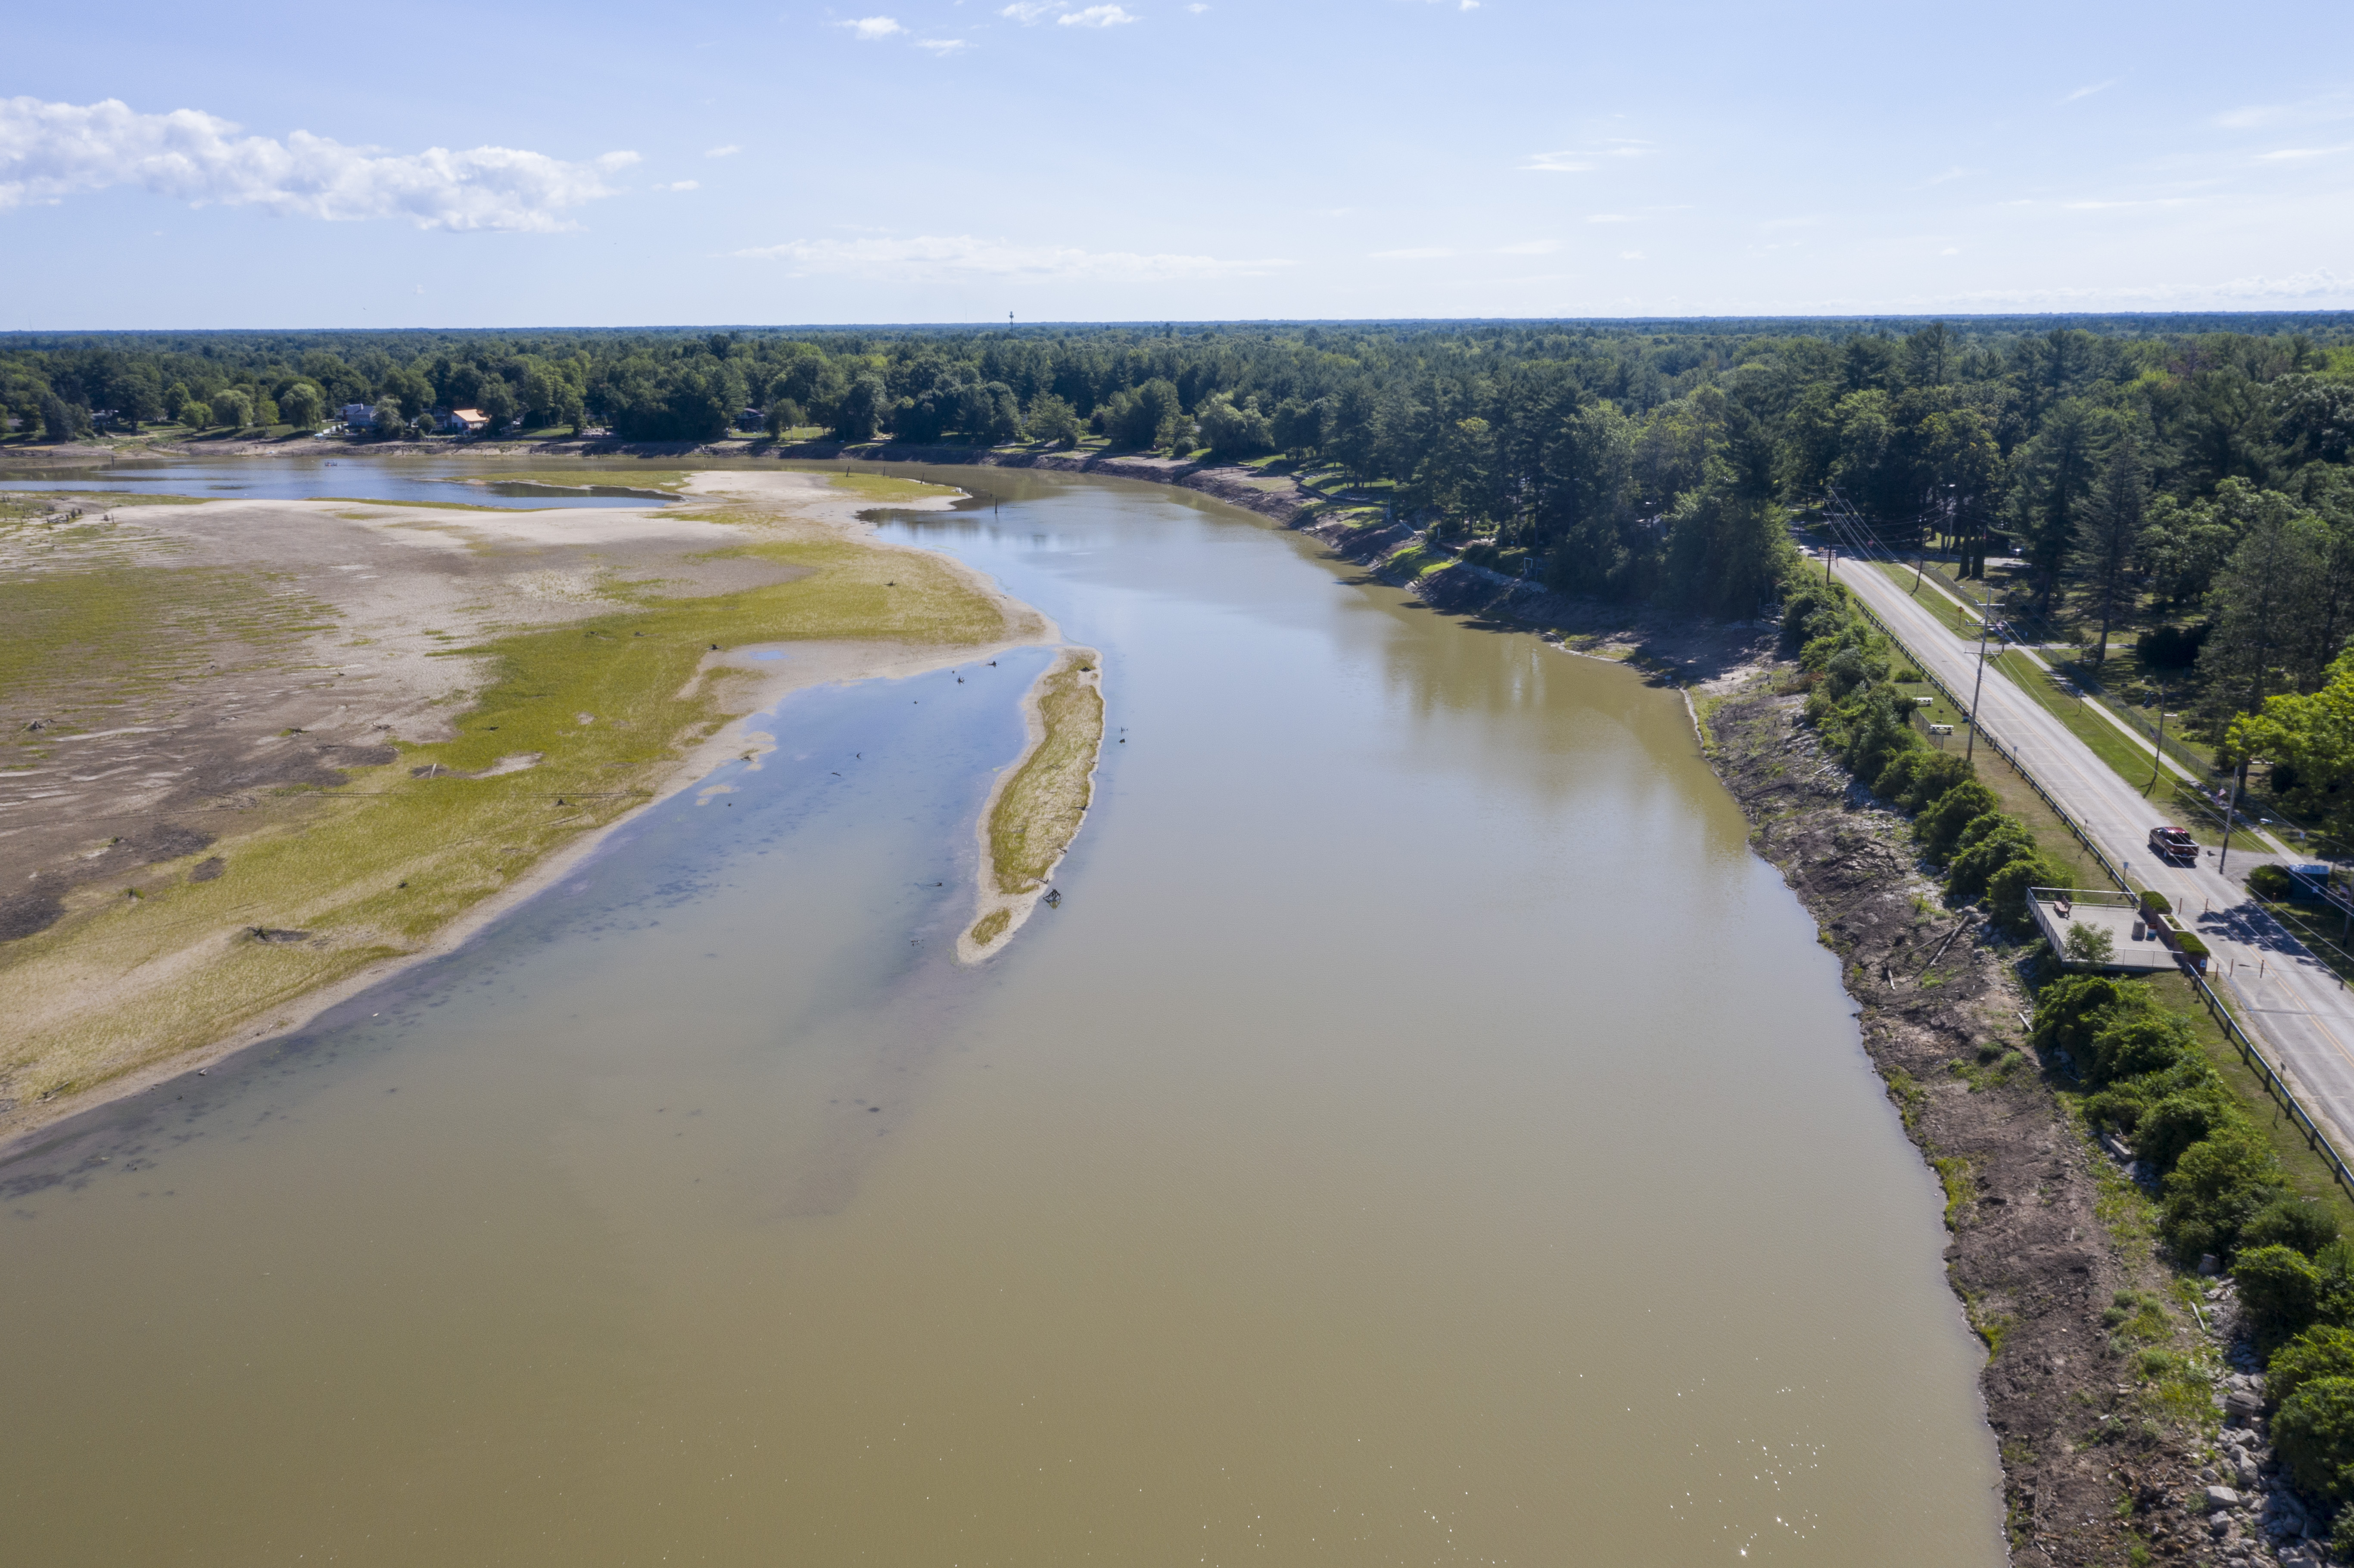 A view of what's left of Sanford Lake in Sanford on Thursday, July 30, 2020. The devastating flood in May due to the failure of the Edenville and Sanford Dam left Wixom and Sanford Lake nearly empty. (Kaytie Boomer | MLive.com)